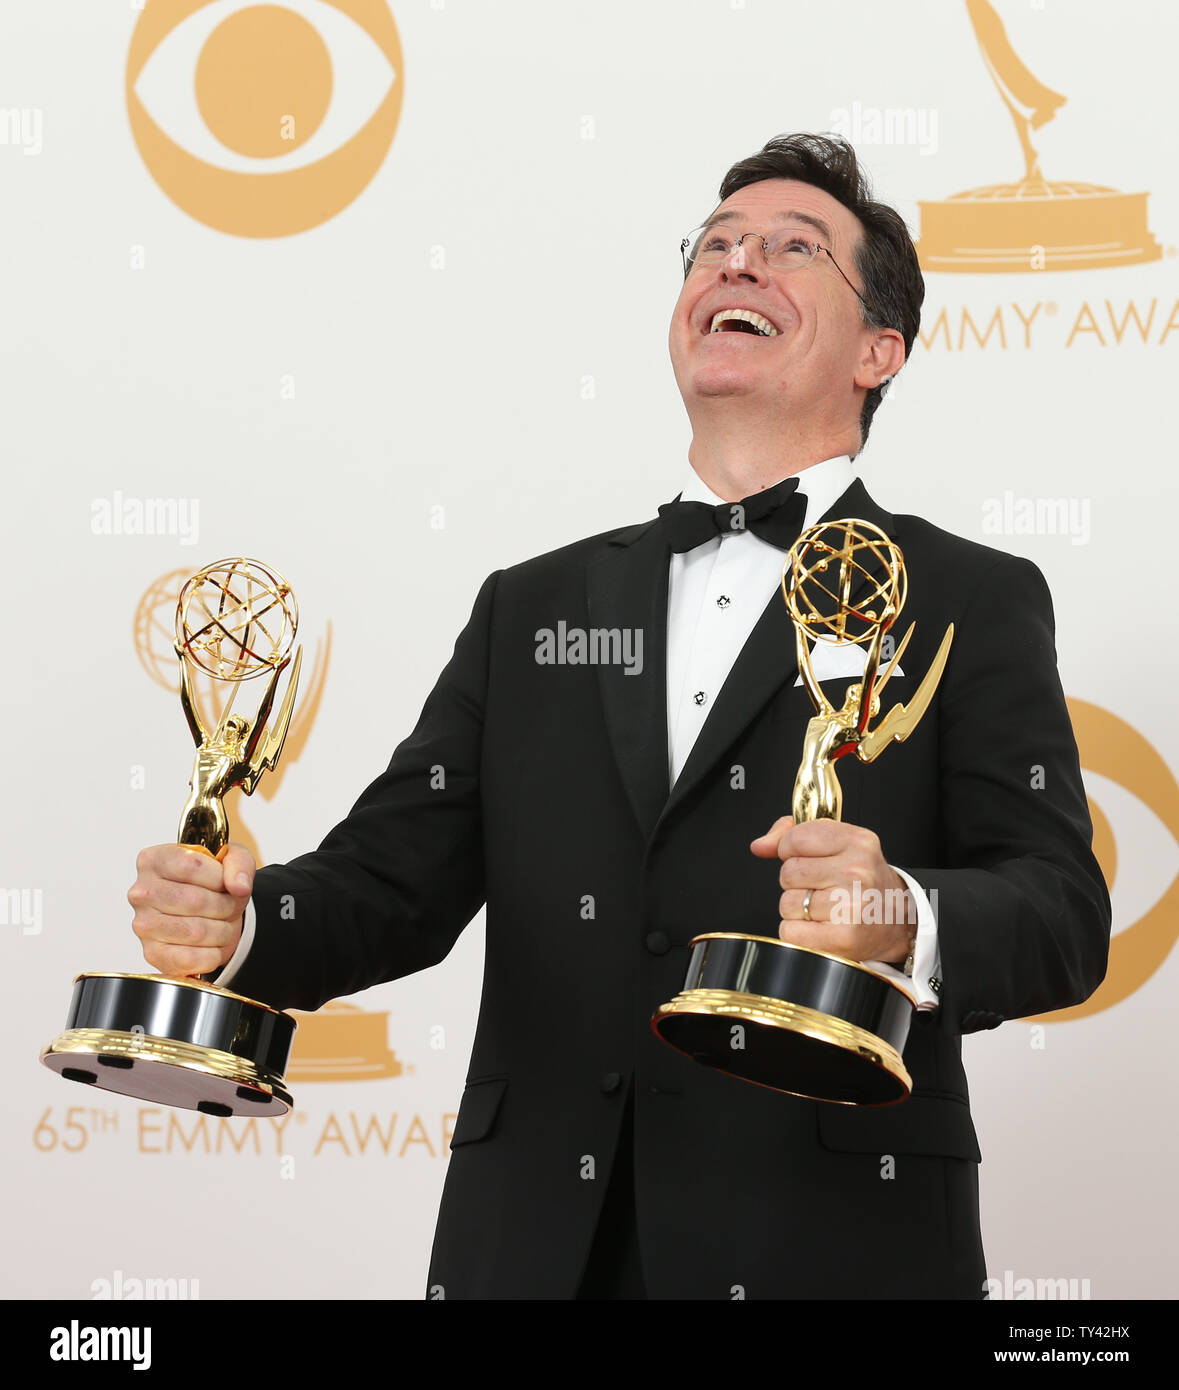 Writer Stephen Colbert holds the award he won for  'Outstanding Writing for a Variety Series - .The Colbert Report' at the 65th Primetime Emmy Awards at Nokia Theatre in Los Angeles on September 22, 2013.   UPI/Danny Moloshok Stock Photo